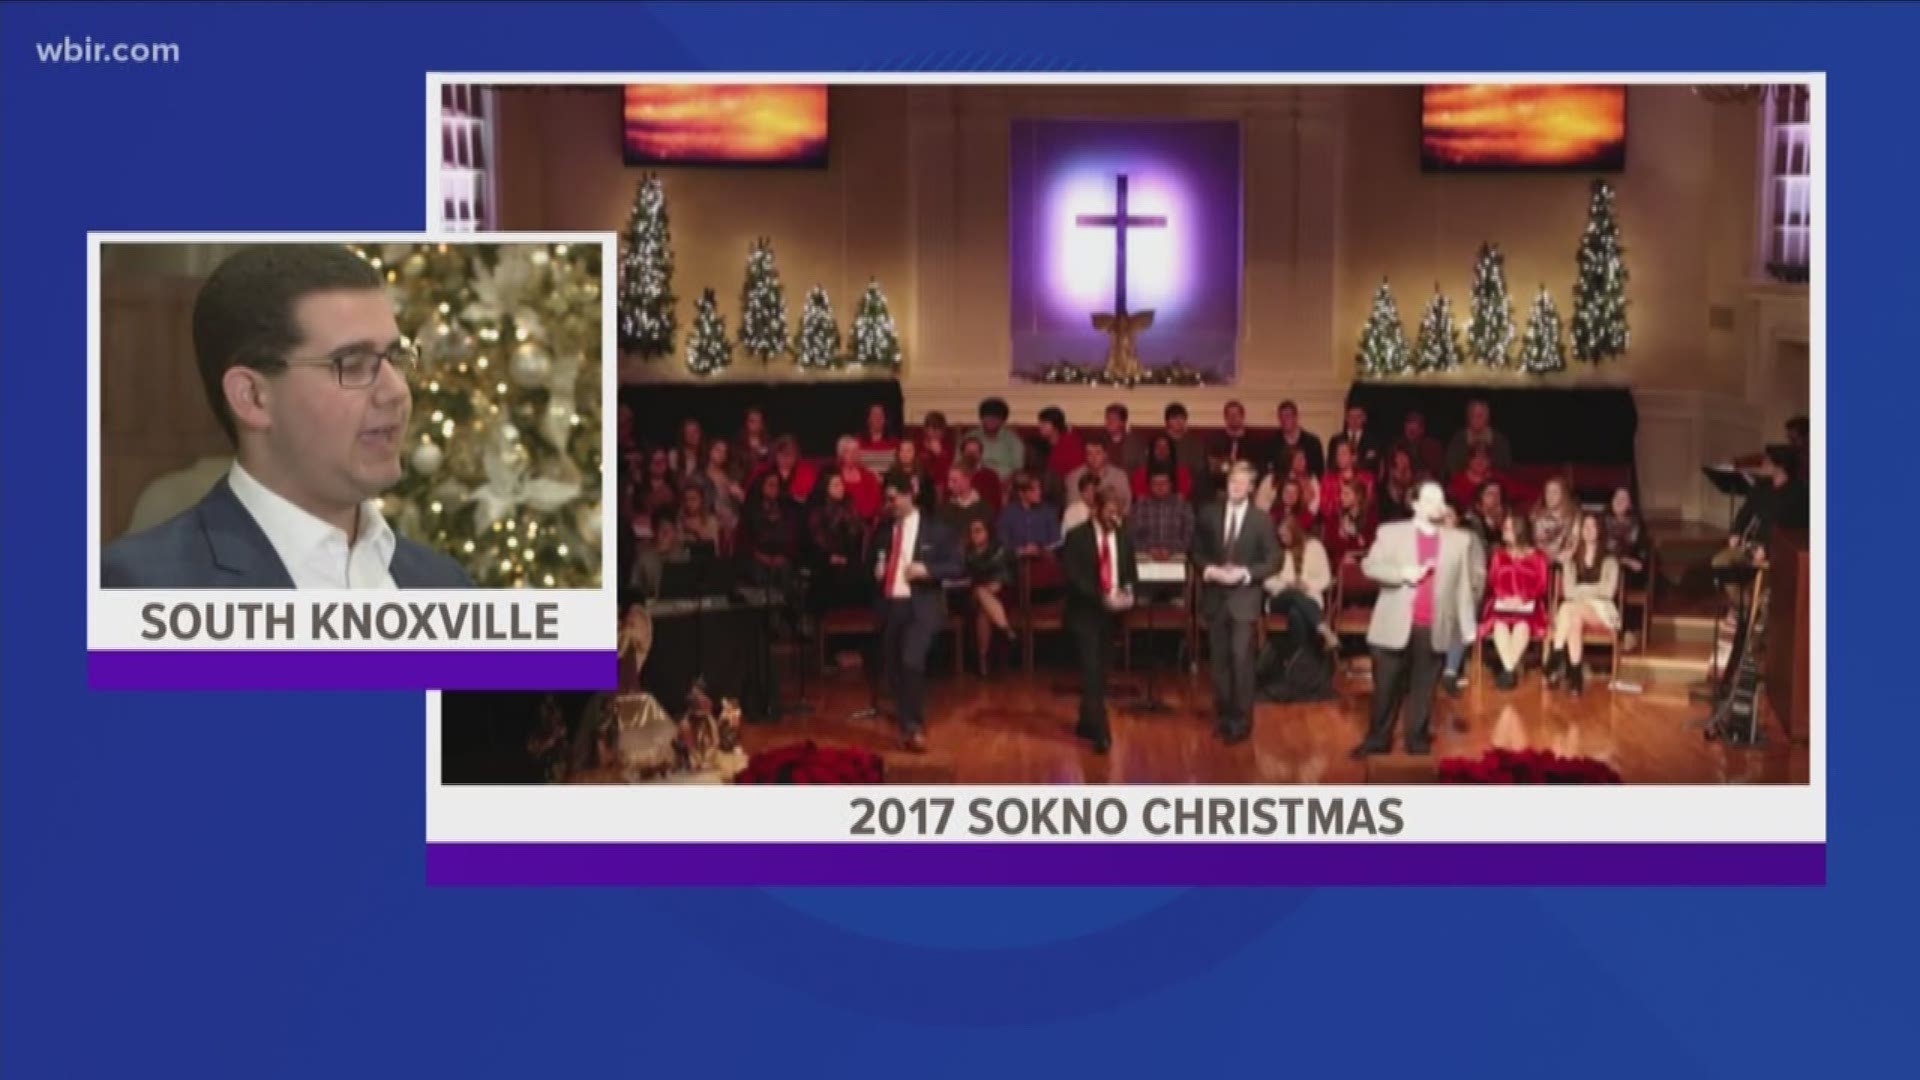 SoKno Christmas is Saturday, December 15 at 6 p.m. at Mount Olive Baptist Church in South Knoxville. Some of the performers include the South Knoxville mass Choir, The Cornerstone Quartet, Stock Creek Bluegrass Band, and more. Dec. 11, 2018-4pm